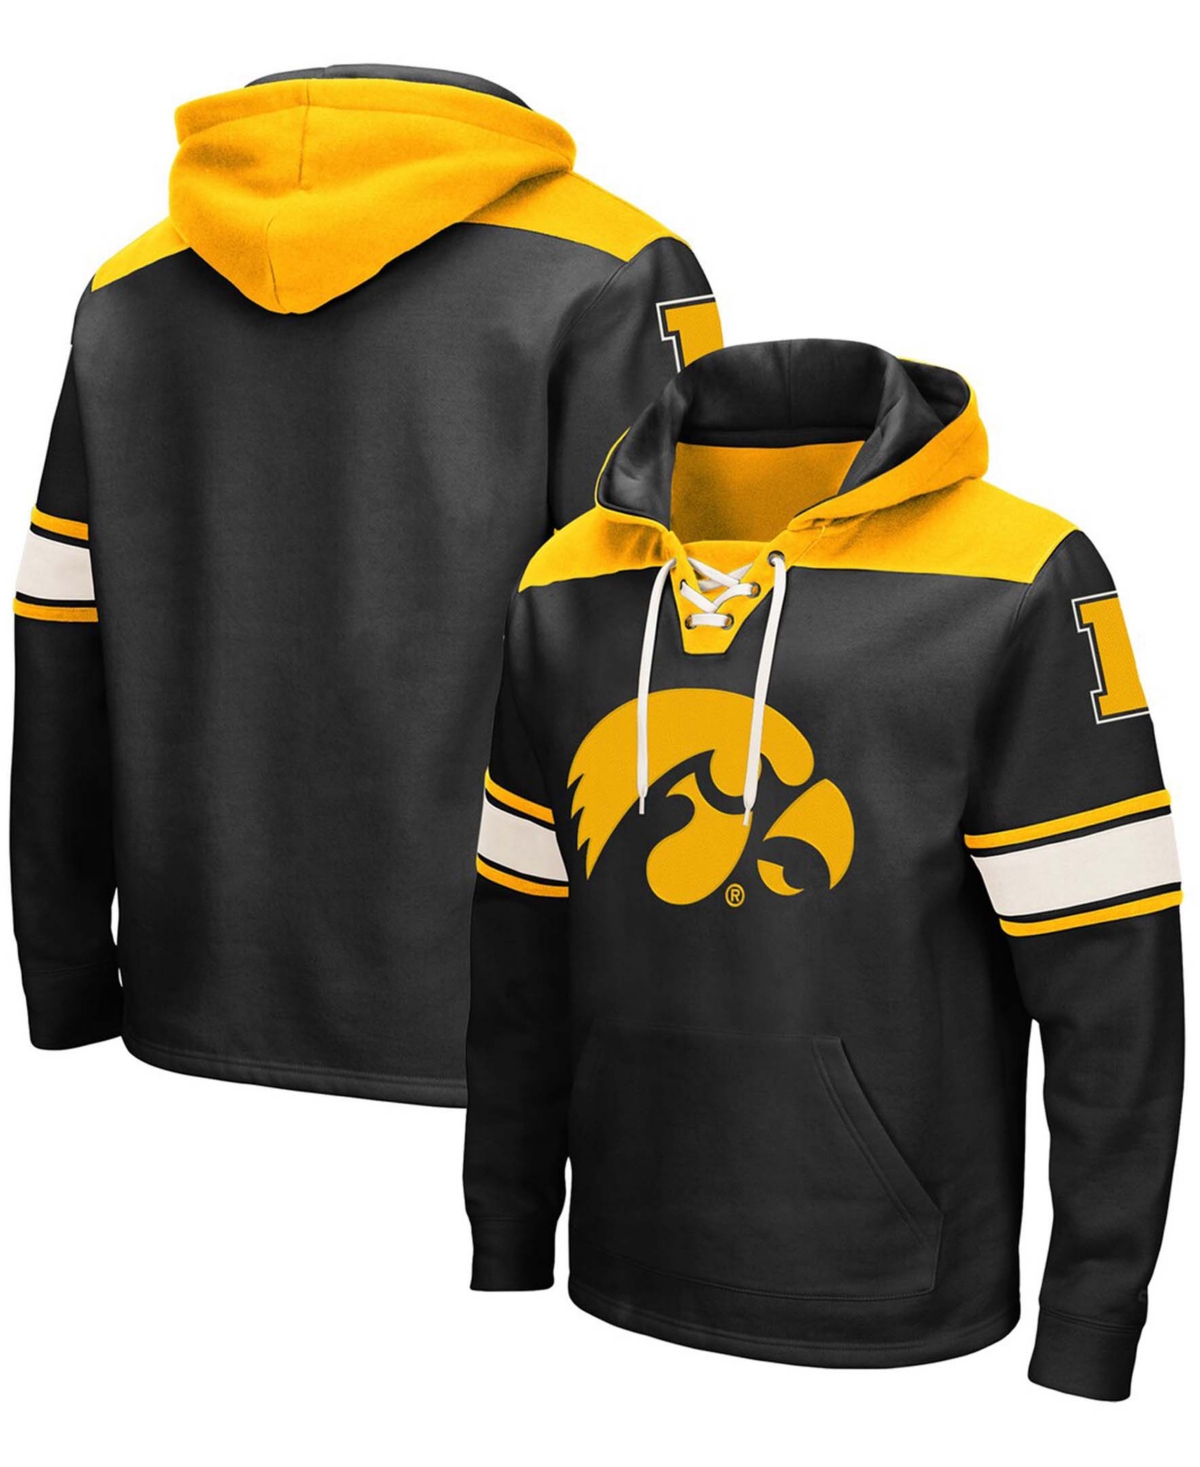 Shop Colosseum Men's Black Iowa Hawkeyes 2.0 Lace-up Pullover Hoodie